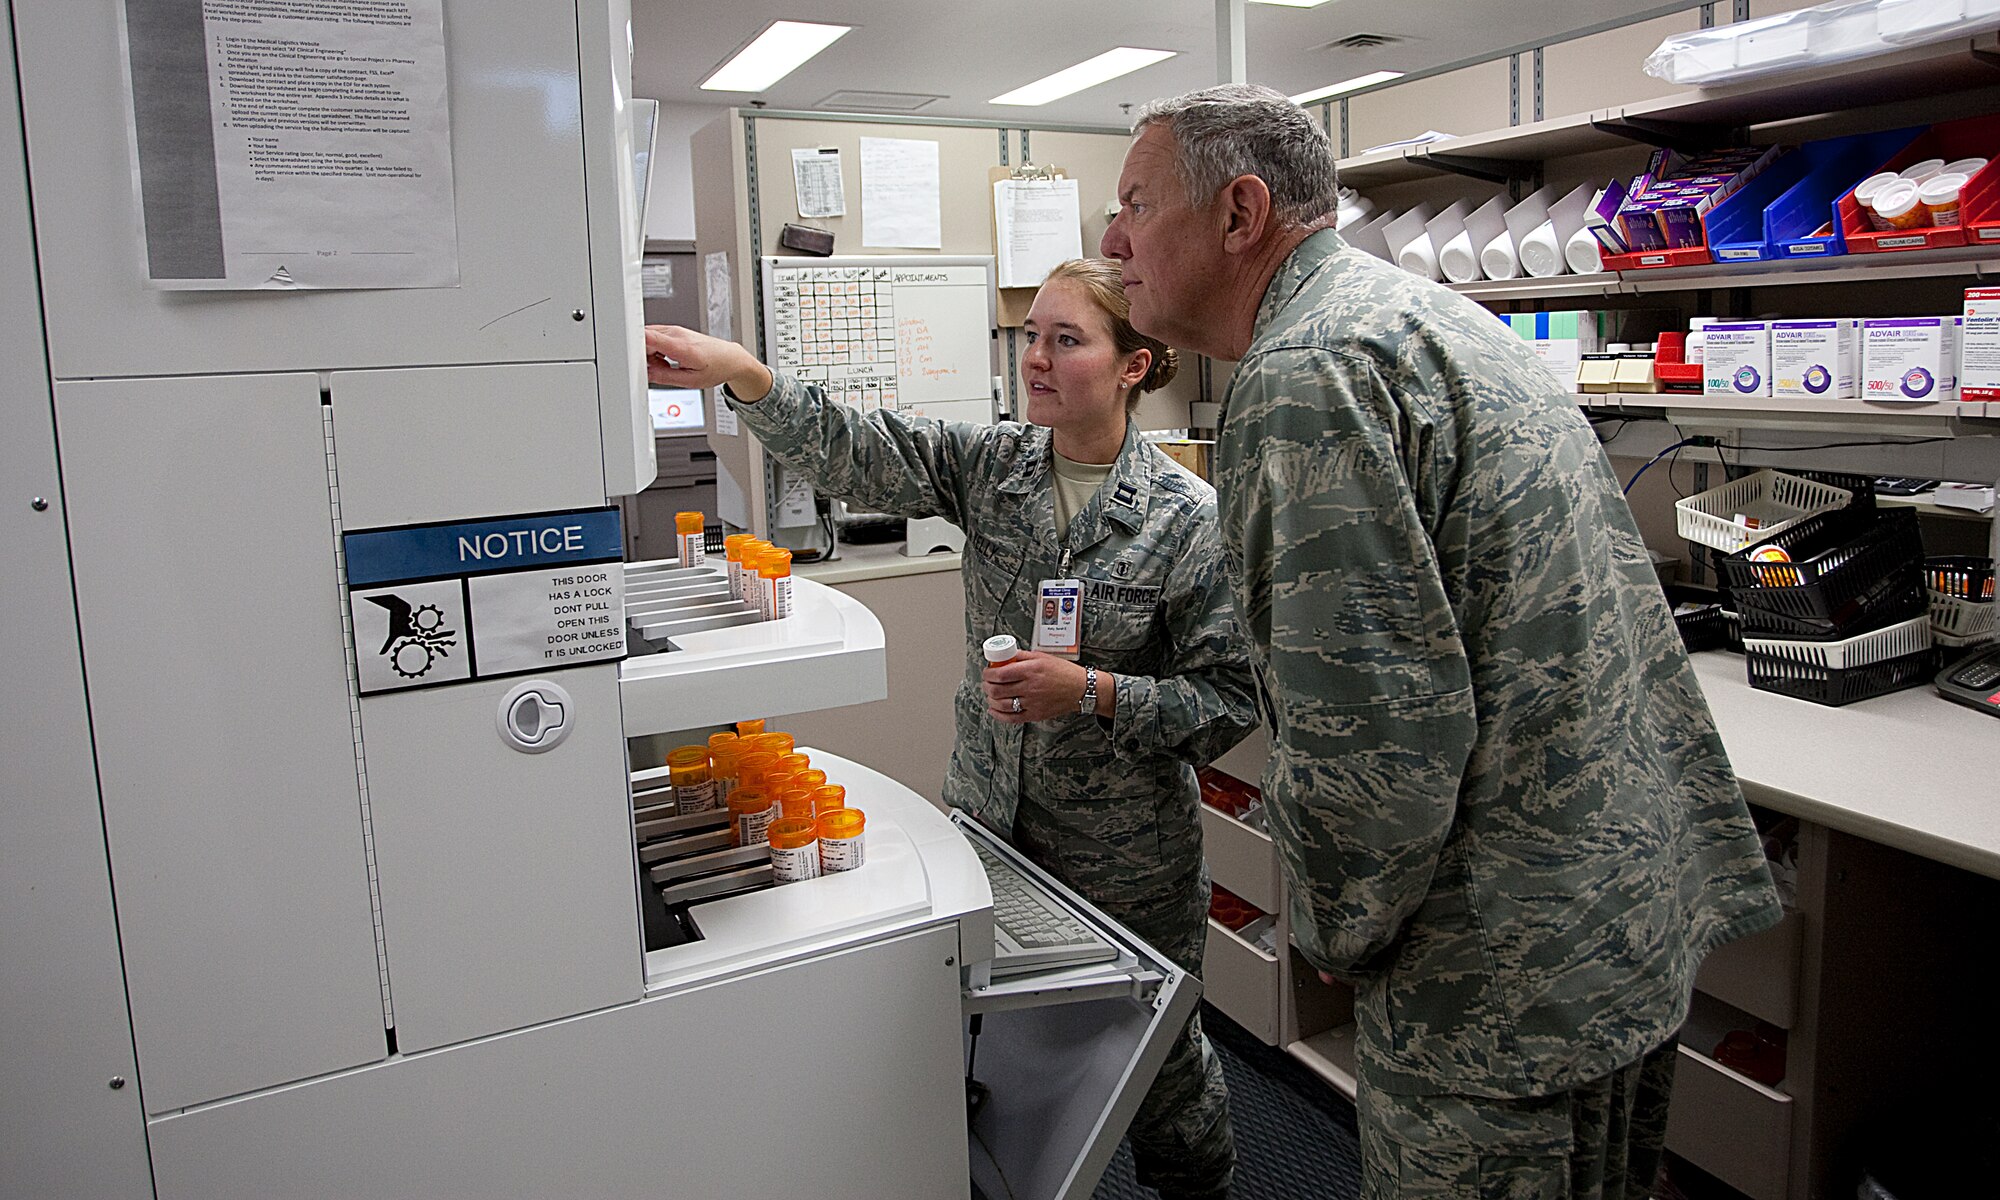 Capt. Sarah Kelly, 90th Medical Support Squadron, demonstrates the system for filling prescriptions during the 20th Air Force commander’s visit here Sept. 7. While here, Maj. Gen. C. Donald Alston visited units within the 90th Medical Group and 90th Mission Support Group as part of a wing familiarization tour. (U.S. Air Force photo by Matt Bilden)